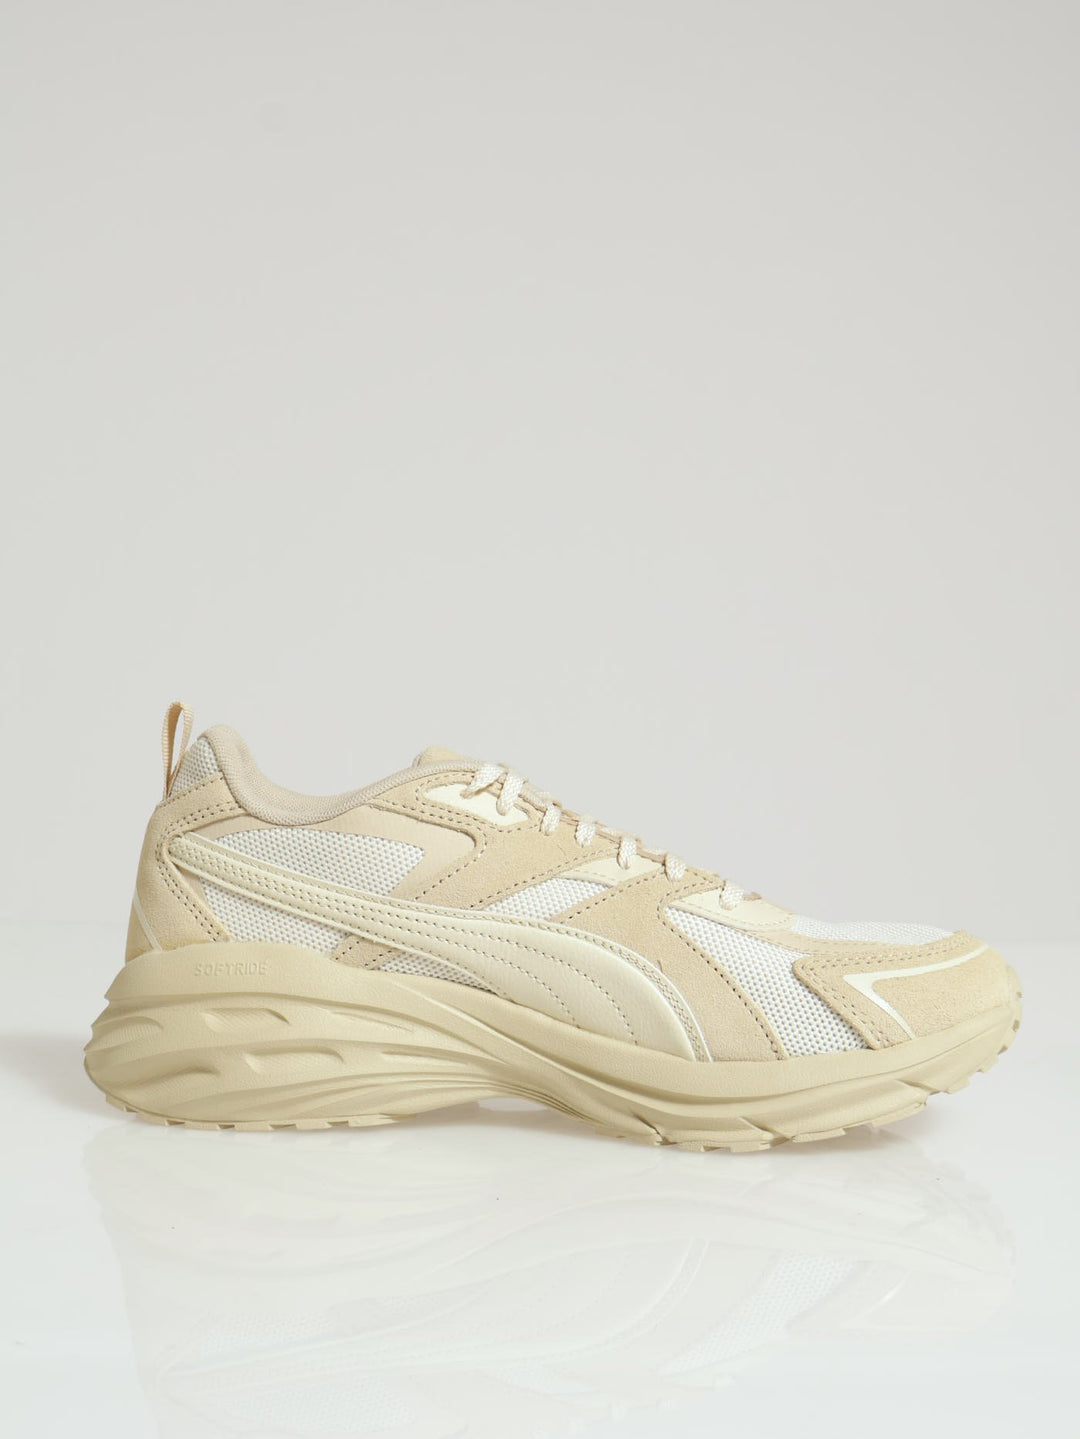 Hypnotic Closed Toe Lace Up Sneaker - Beige